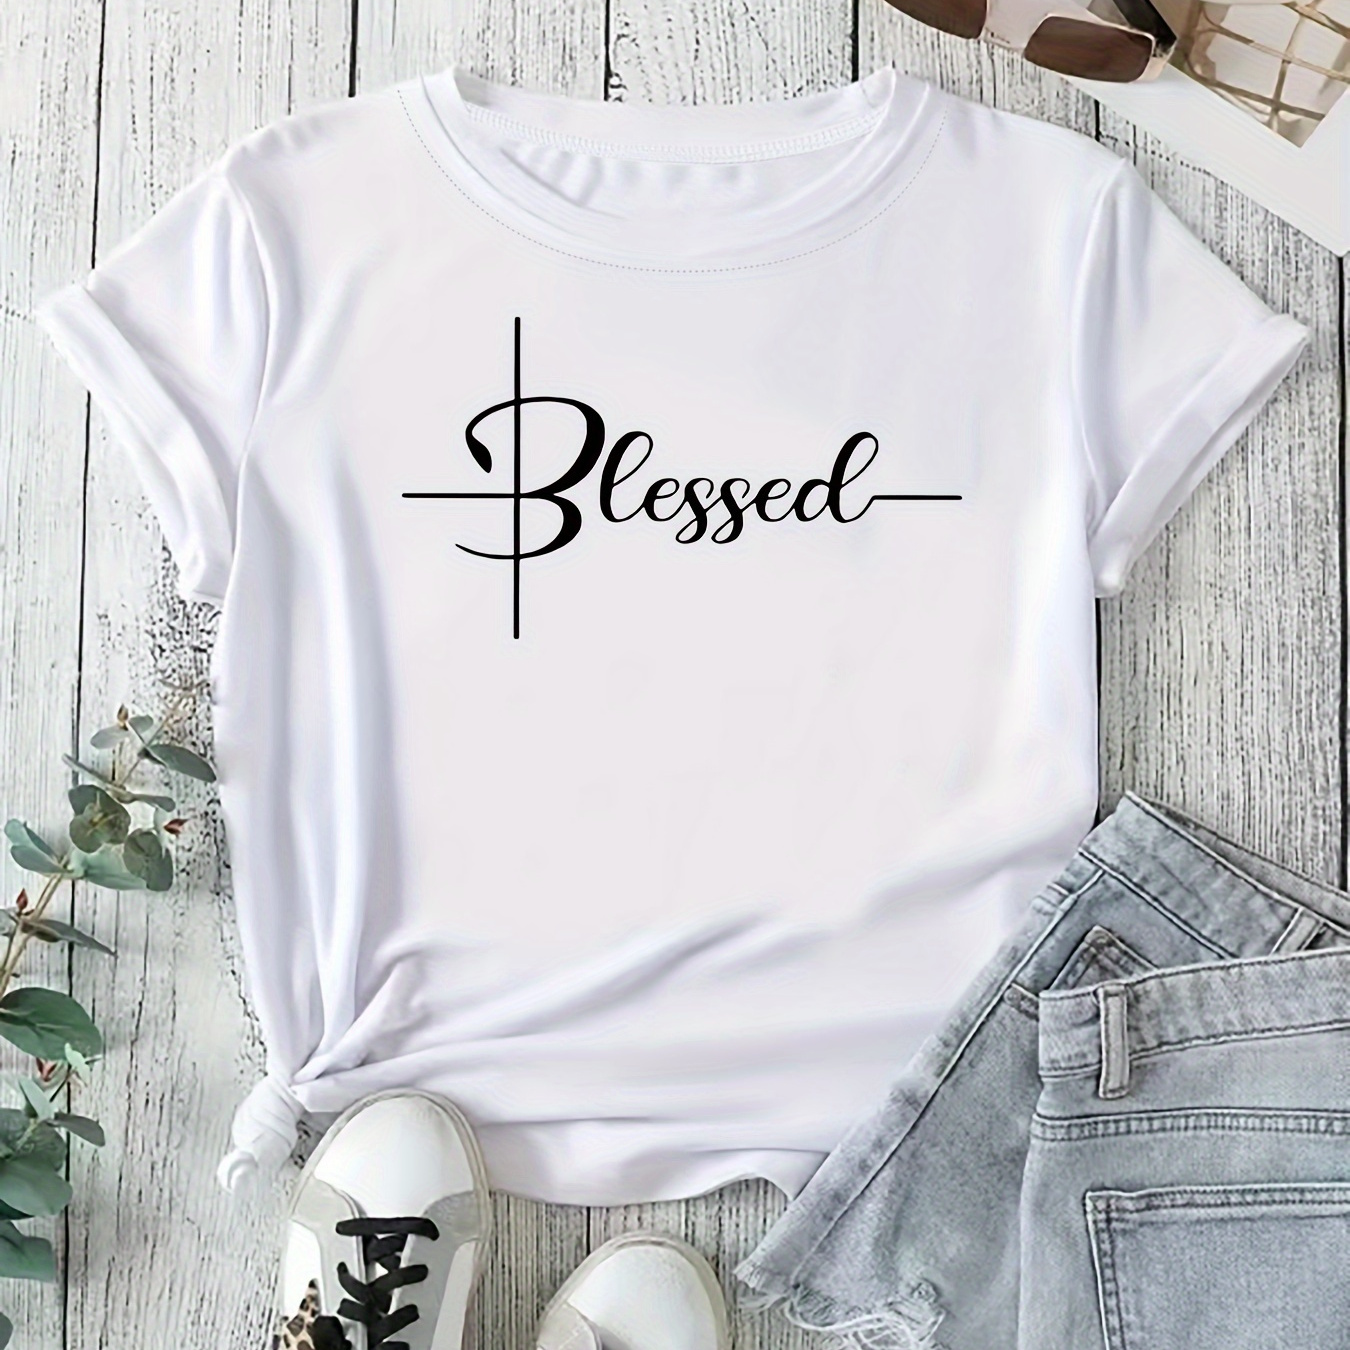 

Blessed Letter Print T-shirt, Casual Crew Neck Short Sleeve Top For Spring & Summer, Women's Clothing